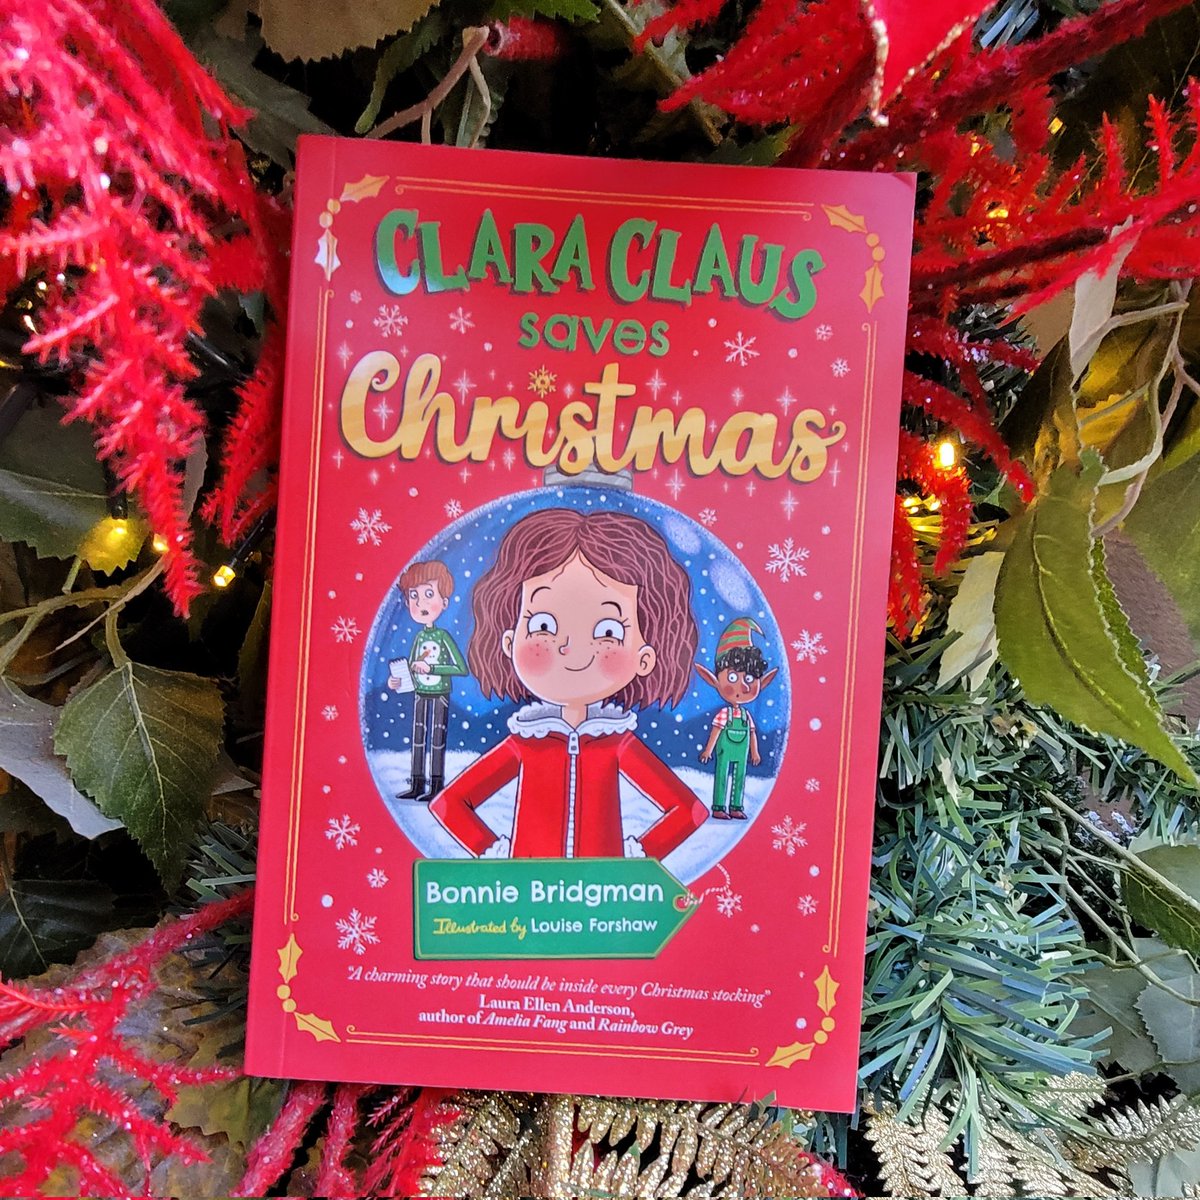 'This was a fabulously written, beautifully illustrated read that could be enjoyed by all ages in the run up to Christmas.'

Clara Claus Saves Christmas by @BonnieMrsbbh and @Munkey_Pants is out now!

tinytreebooks.co.uk/shop/p/clara-c…